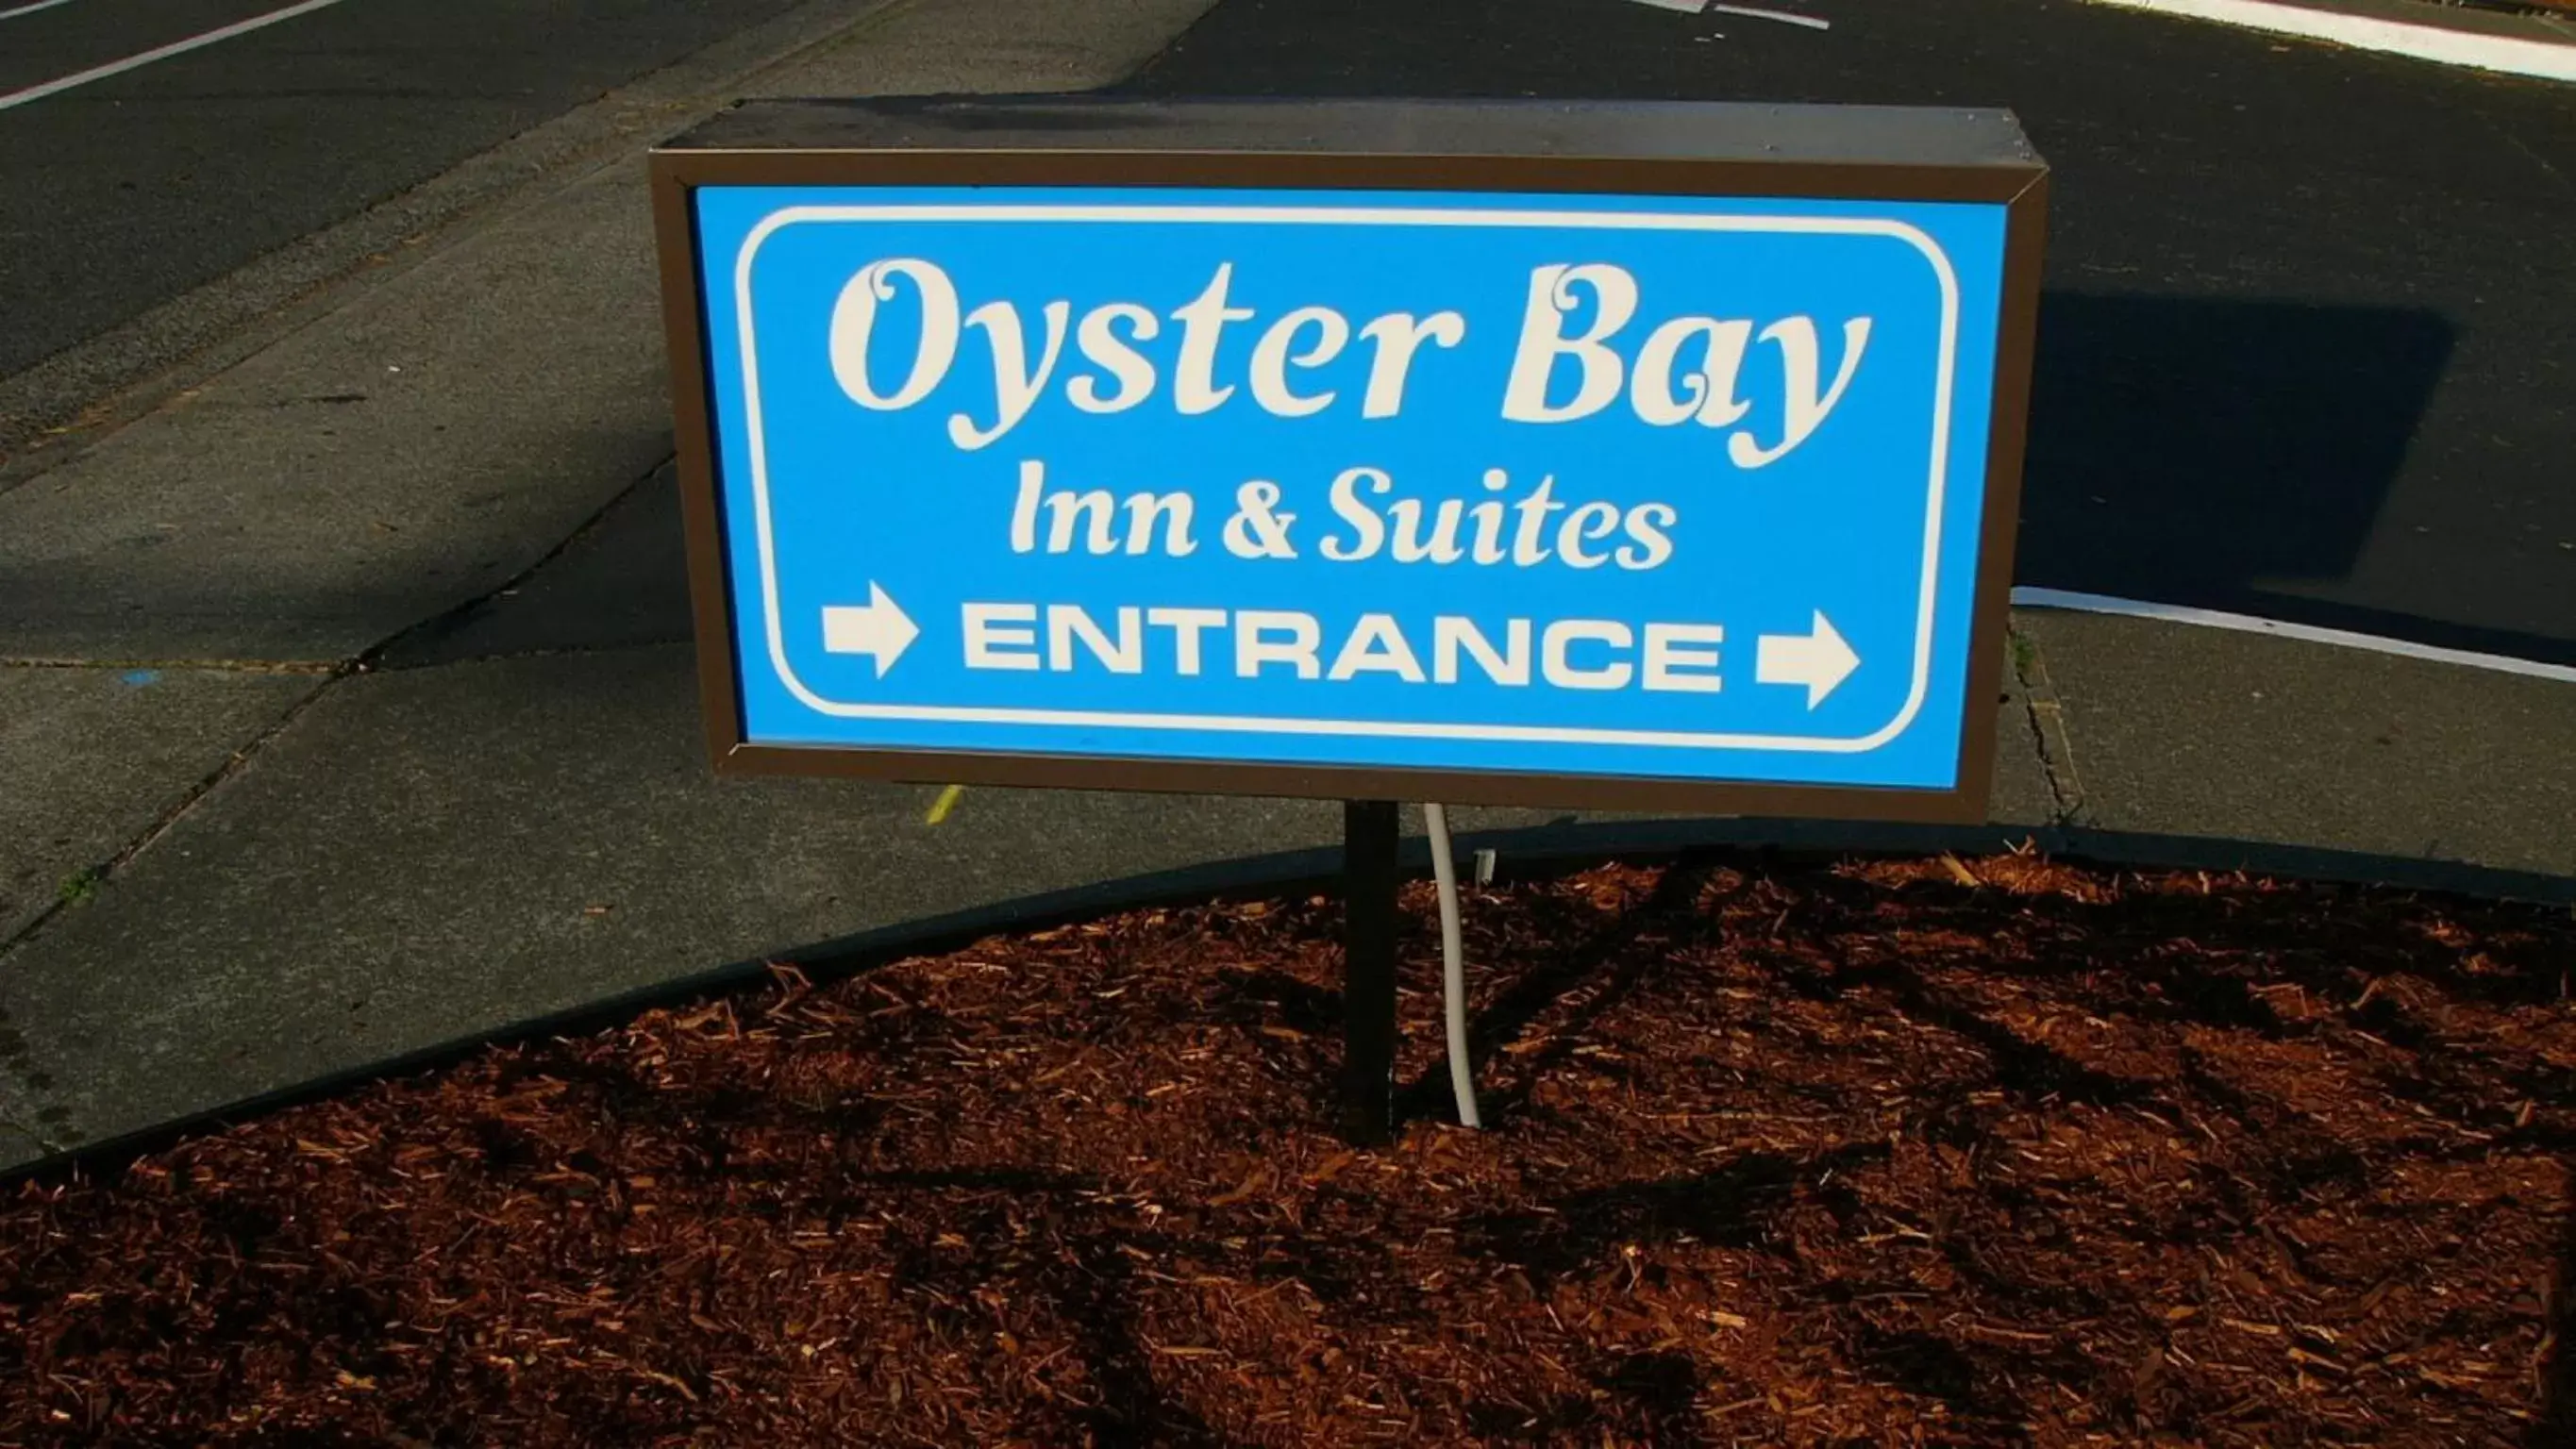 Other in Oyster Bay Inn & Suites